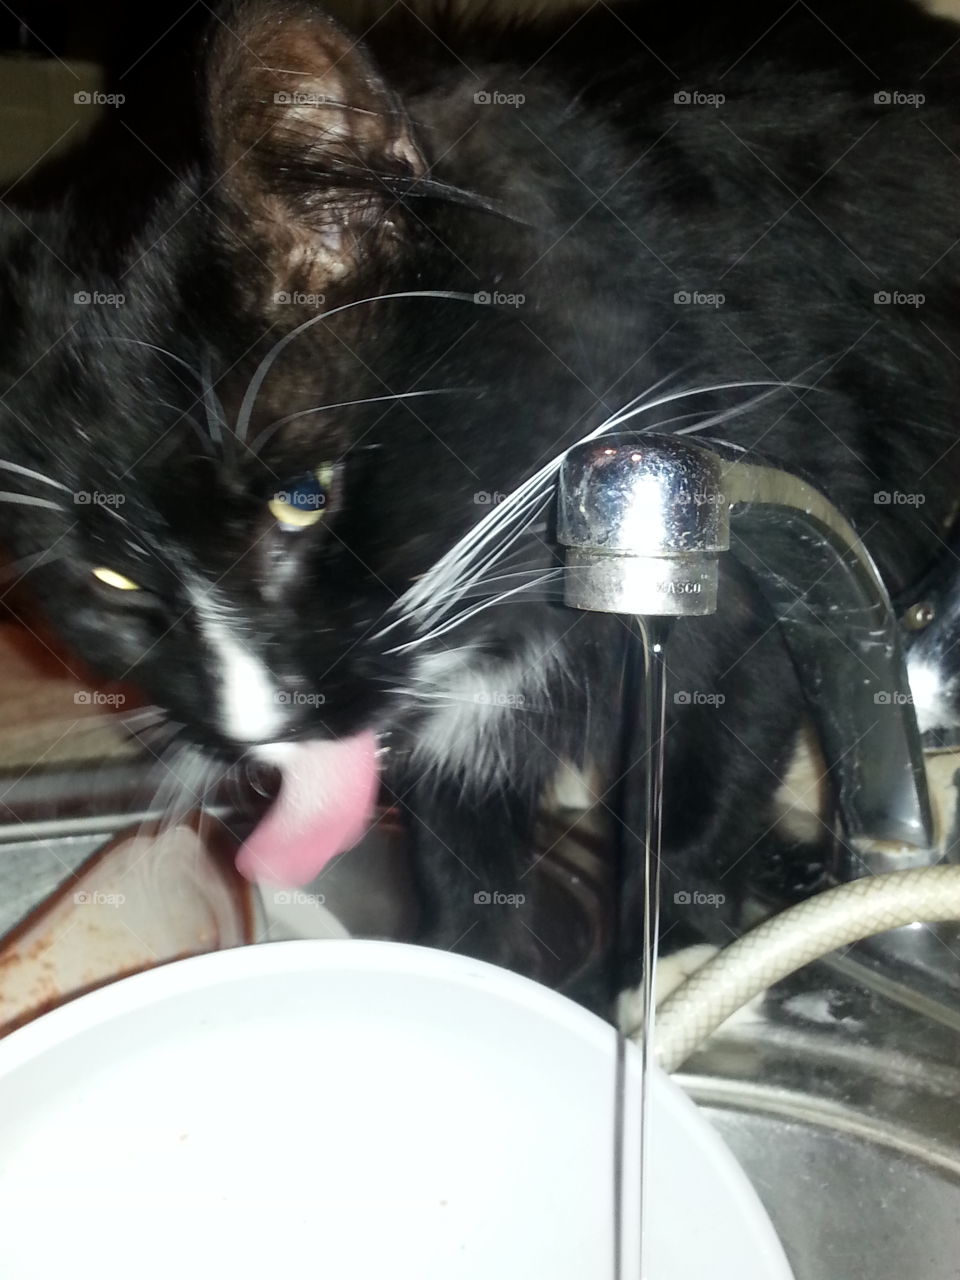 One way to get a drink. cat drinking from faucet